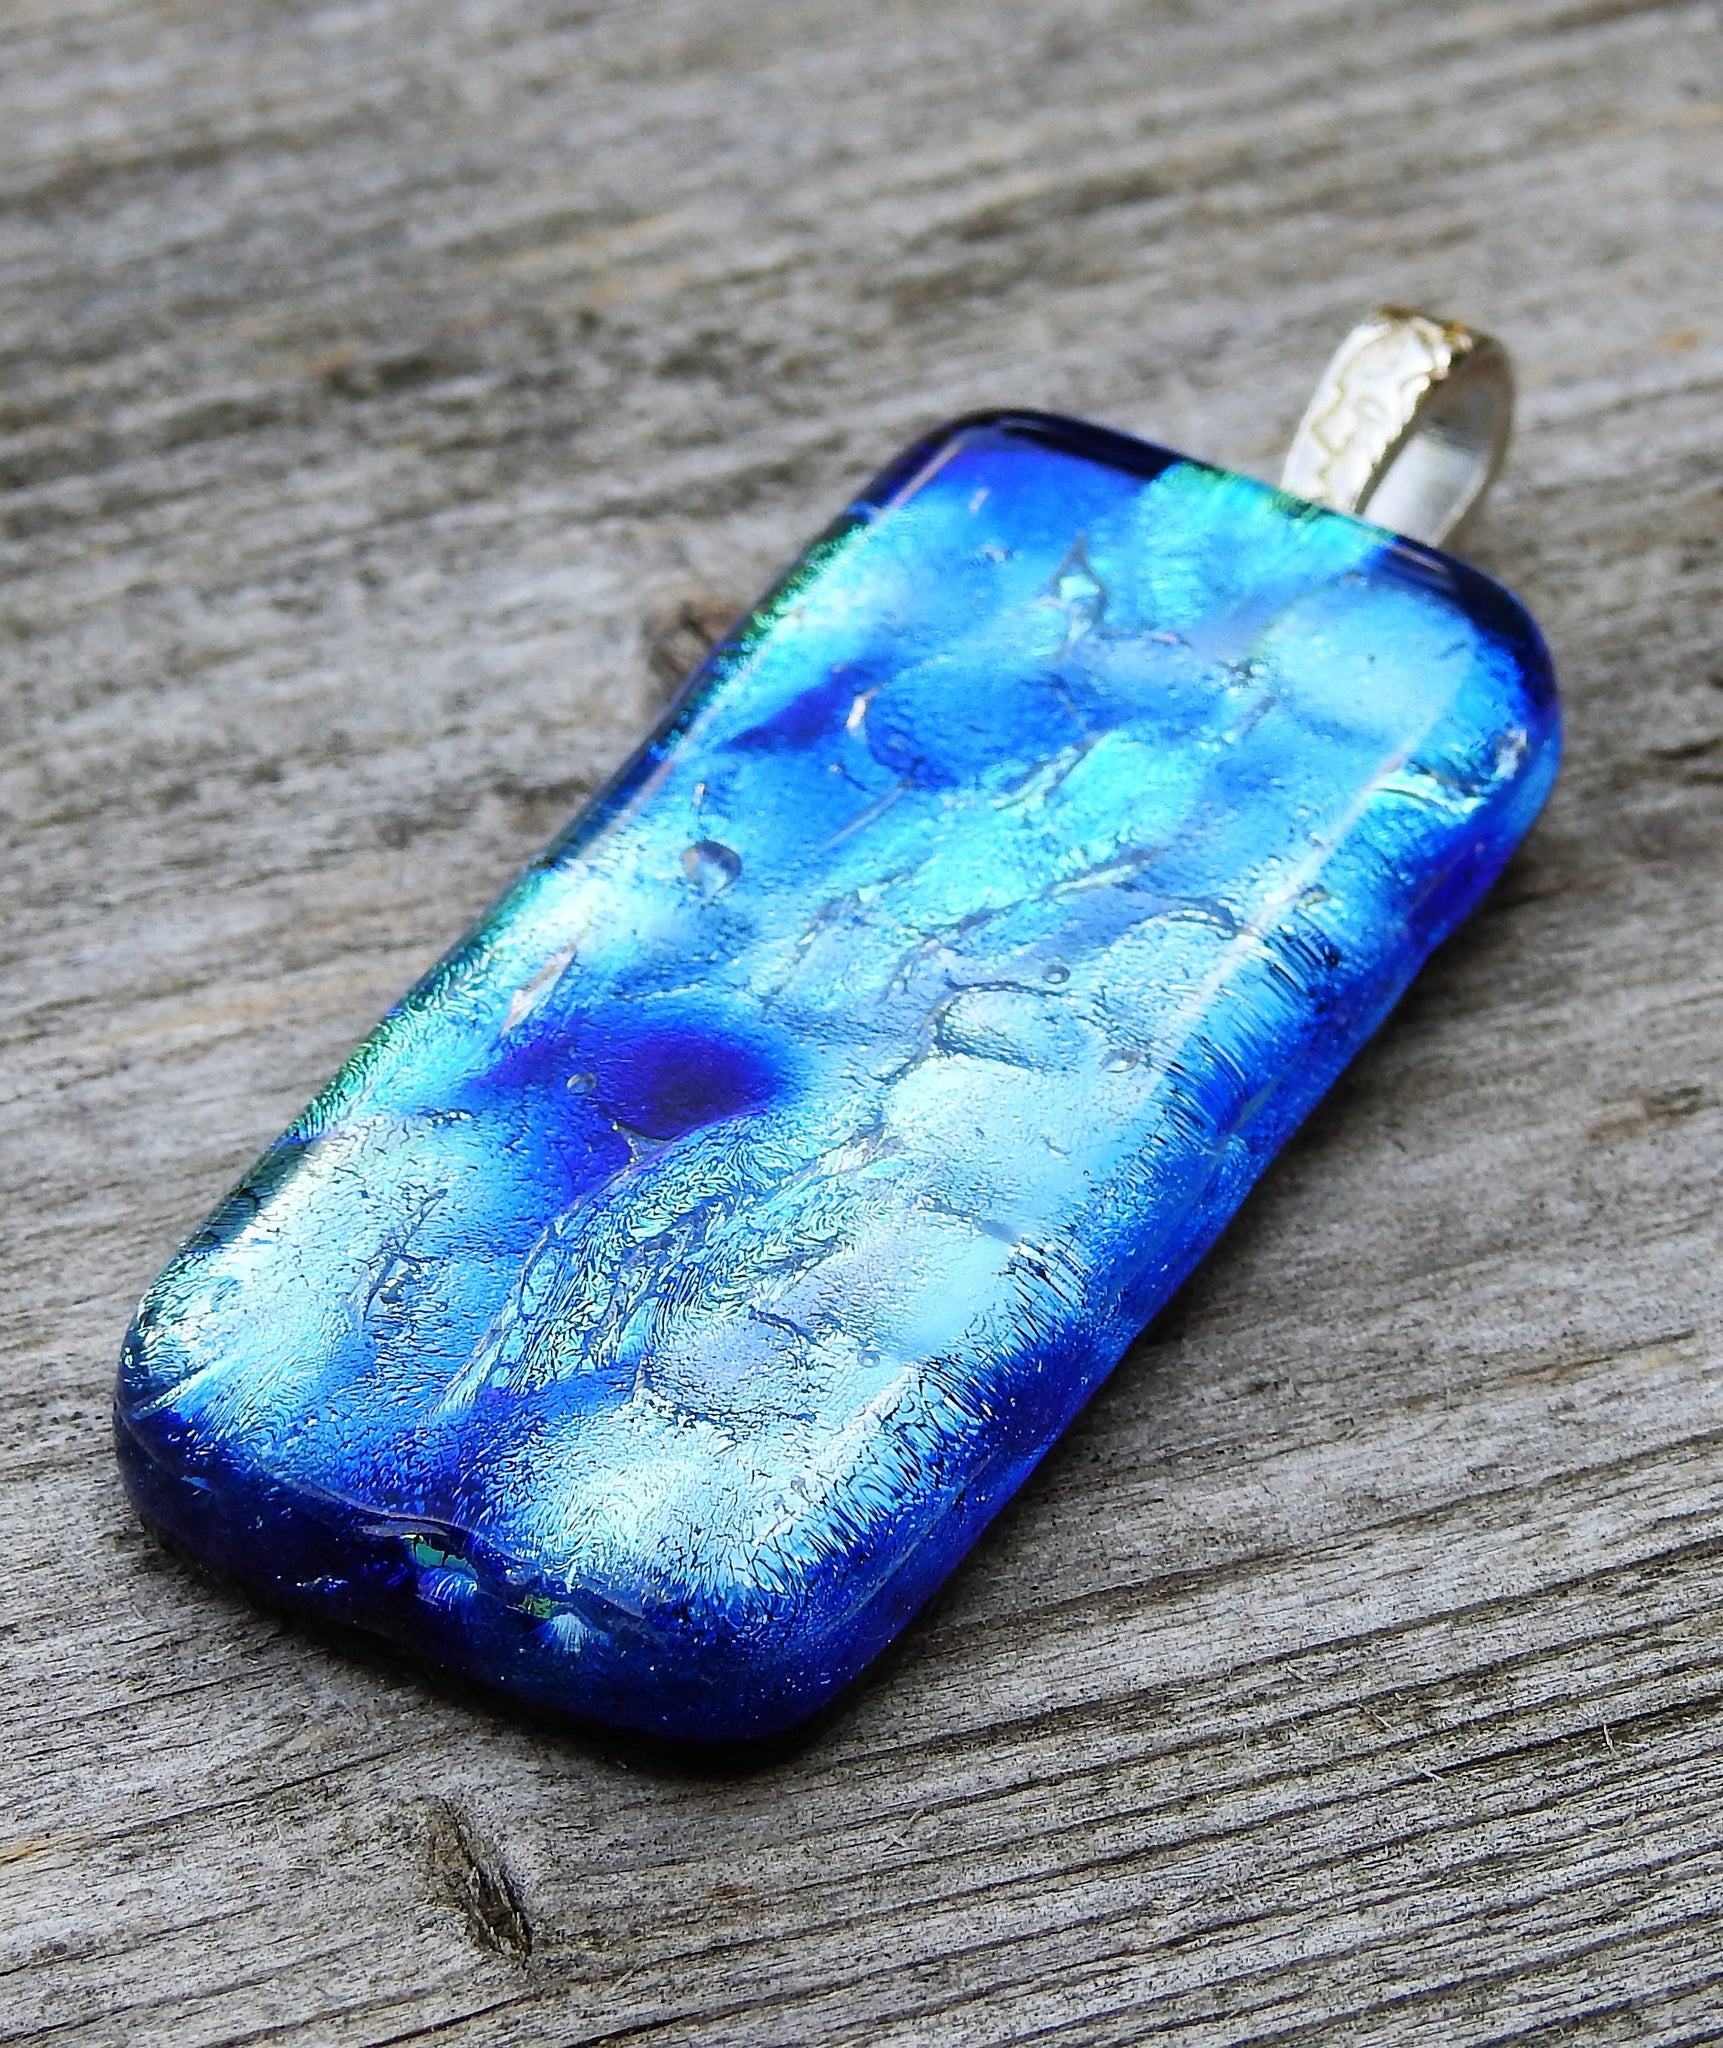 Peacock-like Heavily Textured Dichroic Fused Glass Pendant